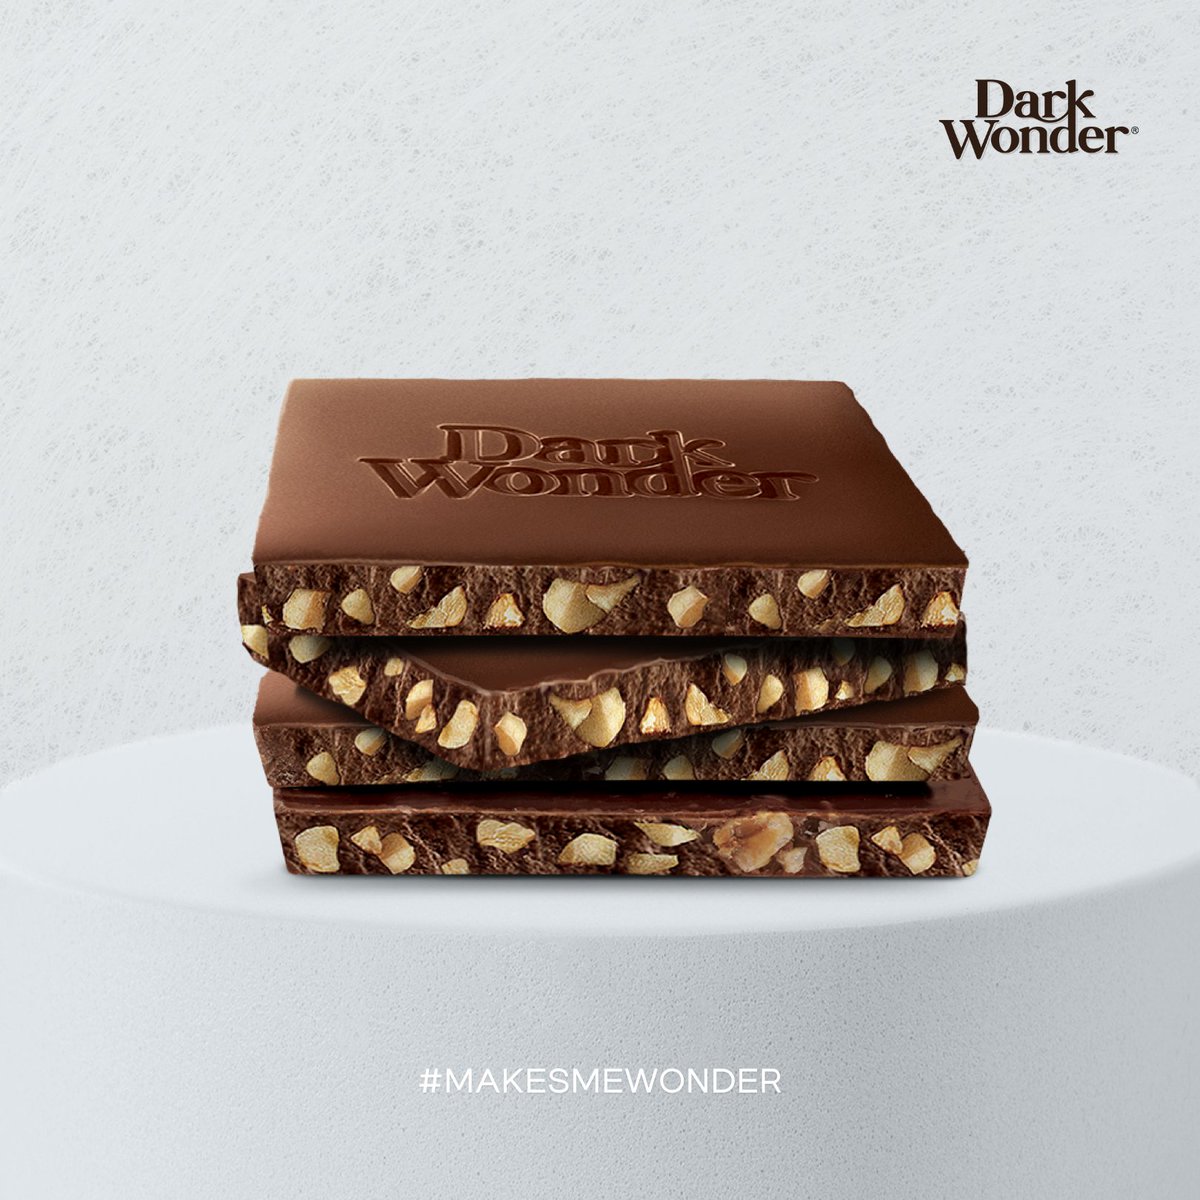 This is the temptation you've been waiting for, isn’t it? Smooth dark chocolate paired with a satisfying crunch, creating the best munching experience just for you.

#DarkWonder #DarkWonderChocolate #MakesMeWonder #DarkWonderMoment